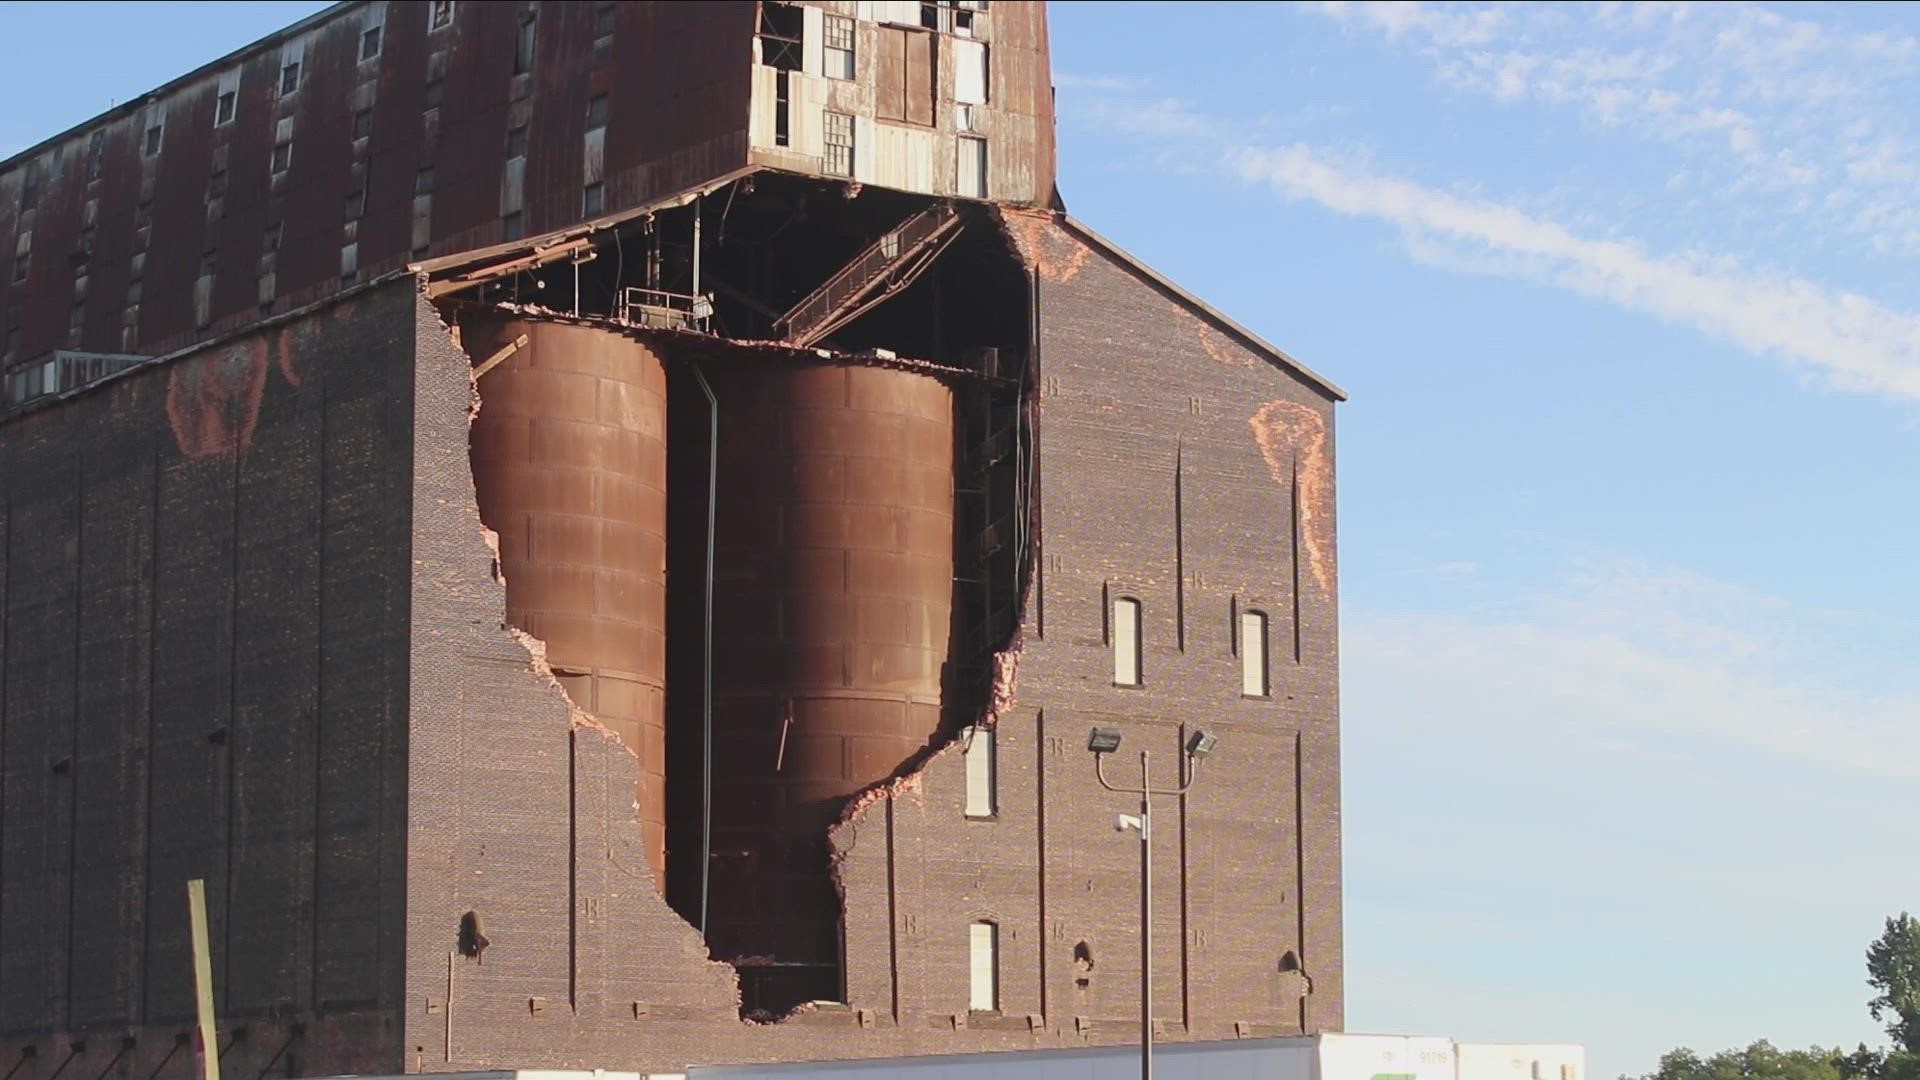 Unless a judge issues an injunction to halt the demolition of the historic Great Northern Elevator, the process could begin within 48 hours